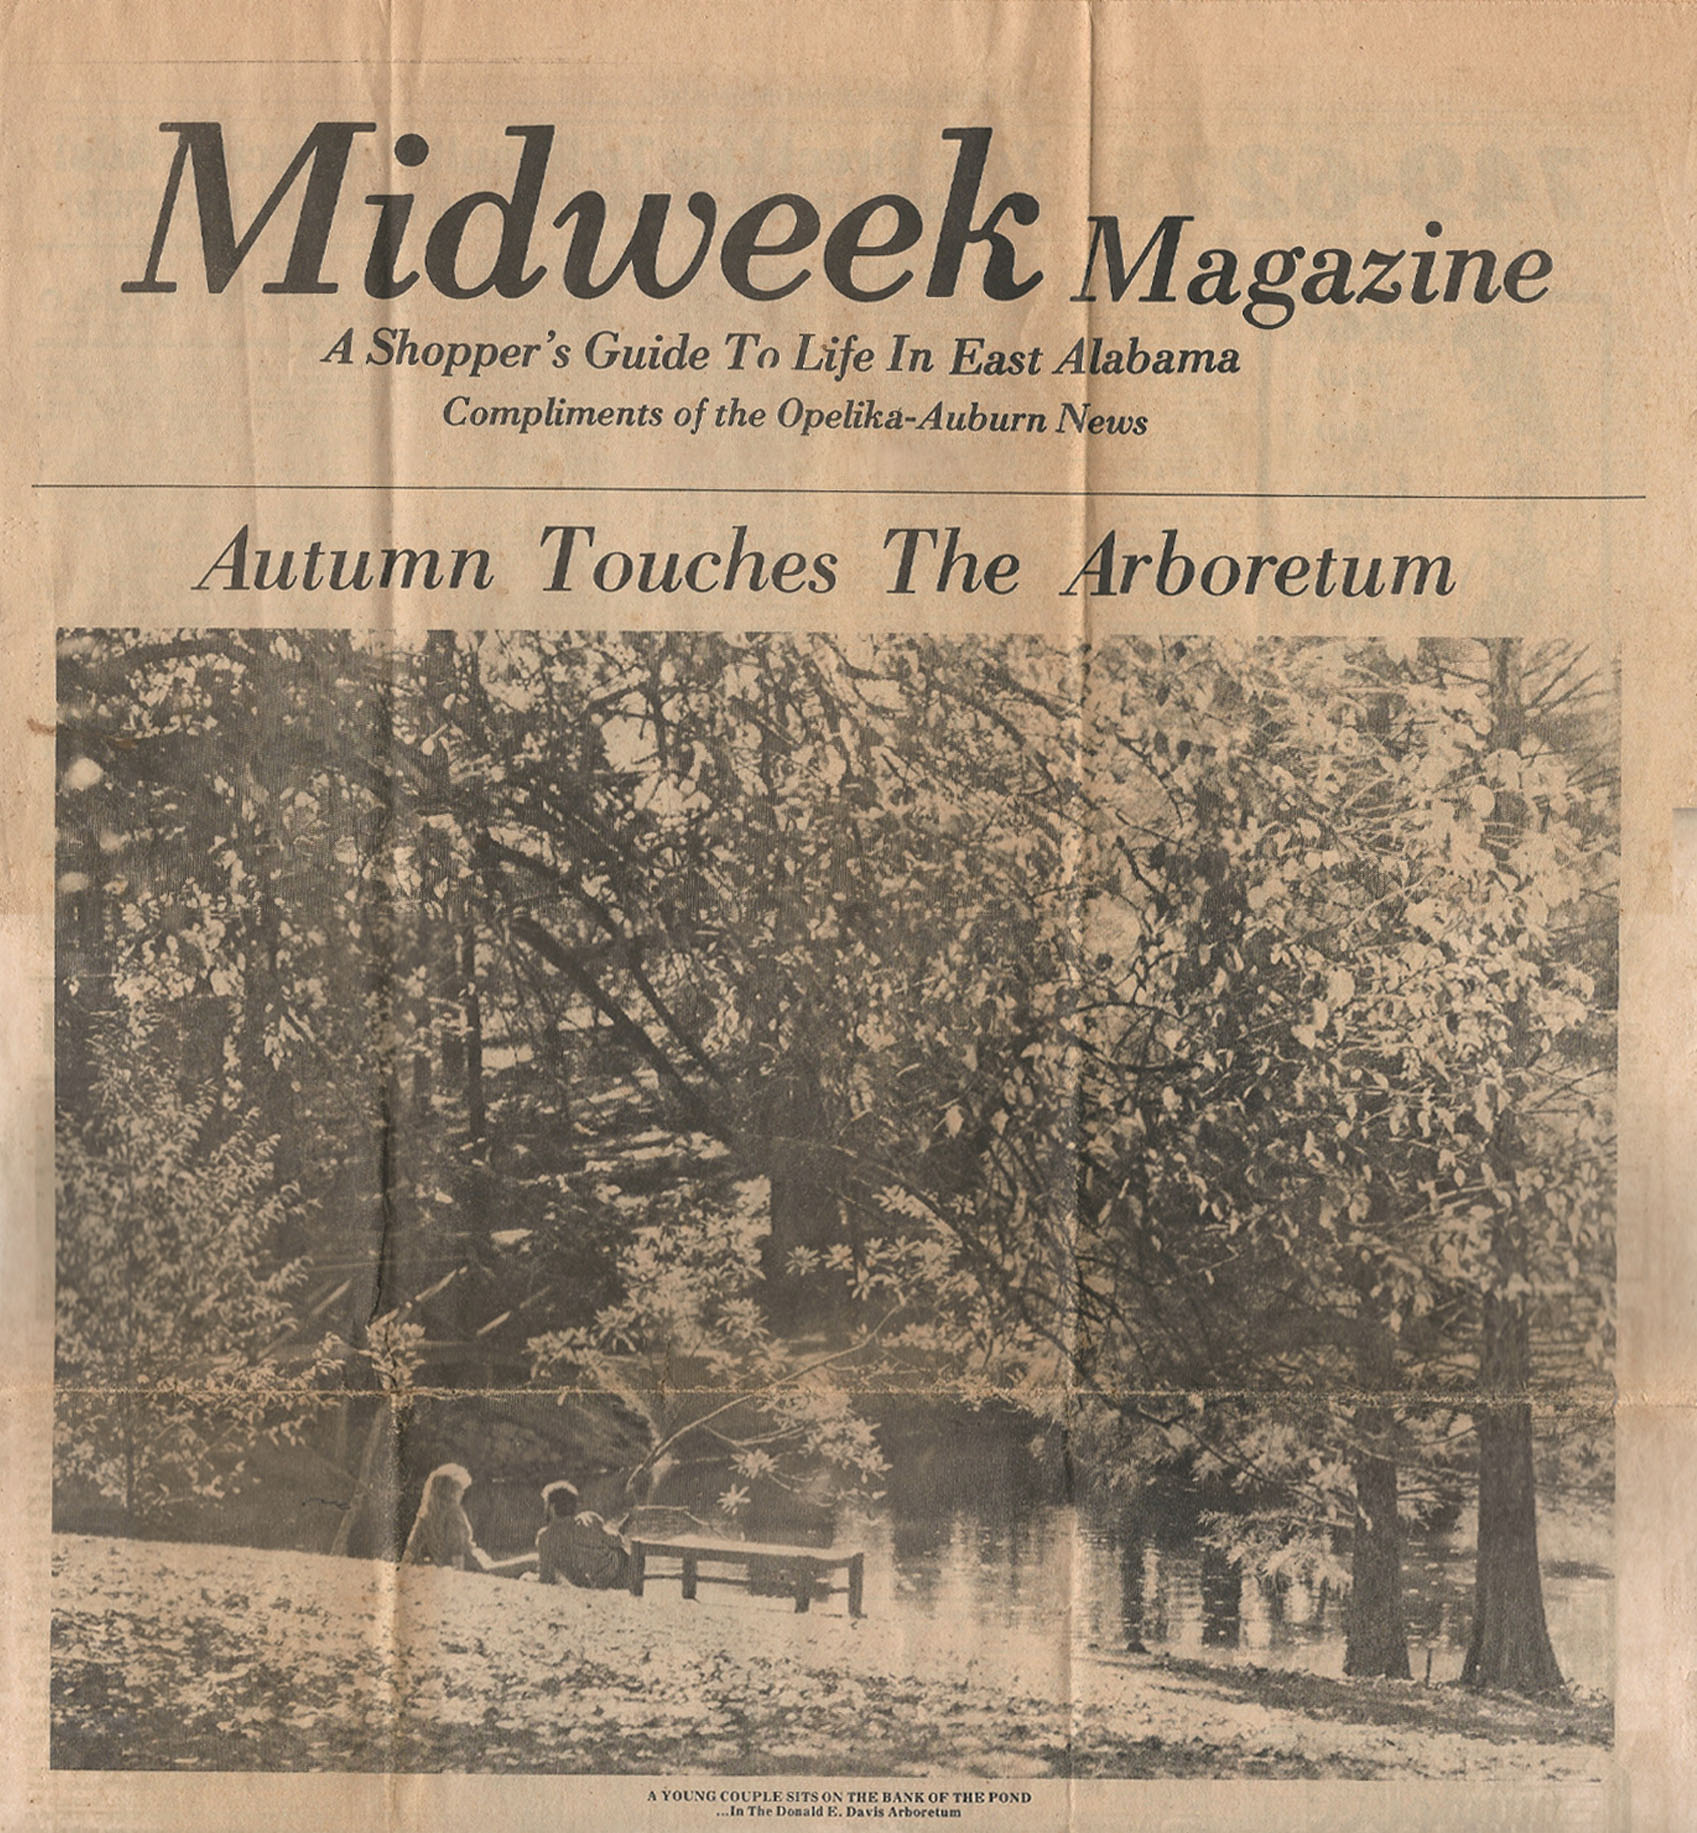 Newspaper from 1983 featuring Fall in the Arboretum